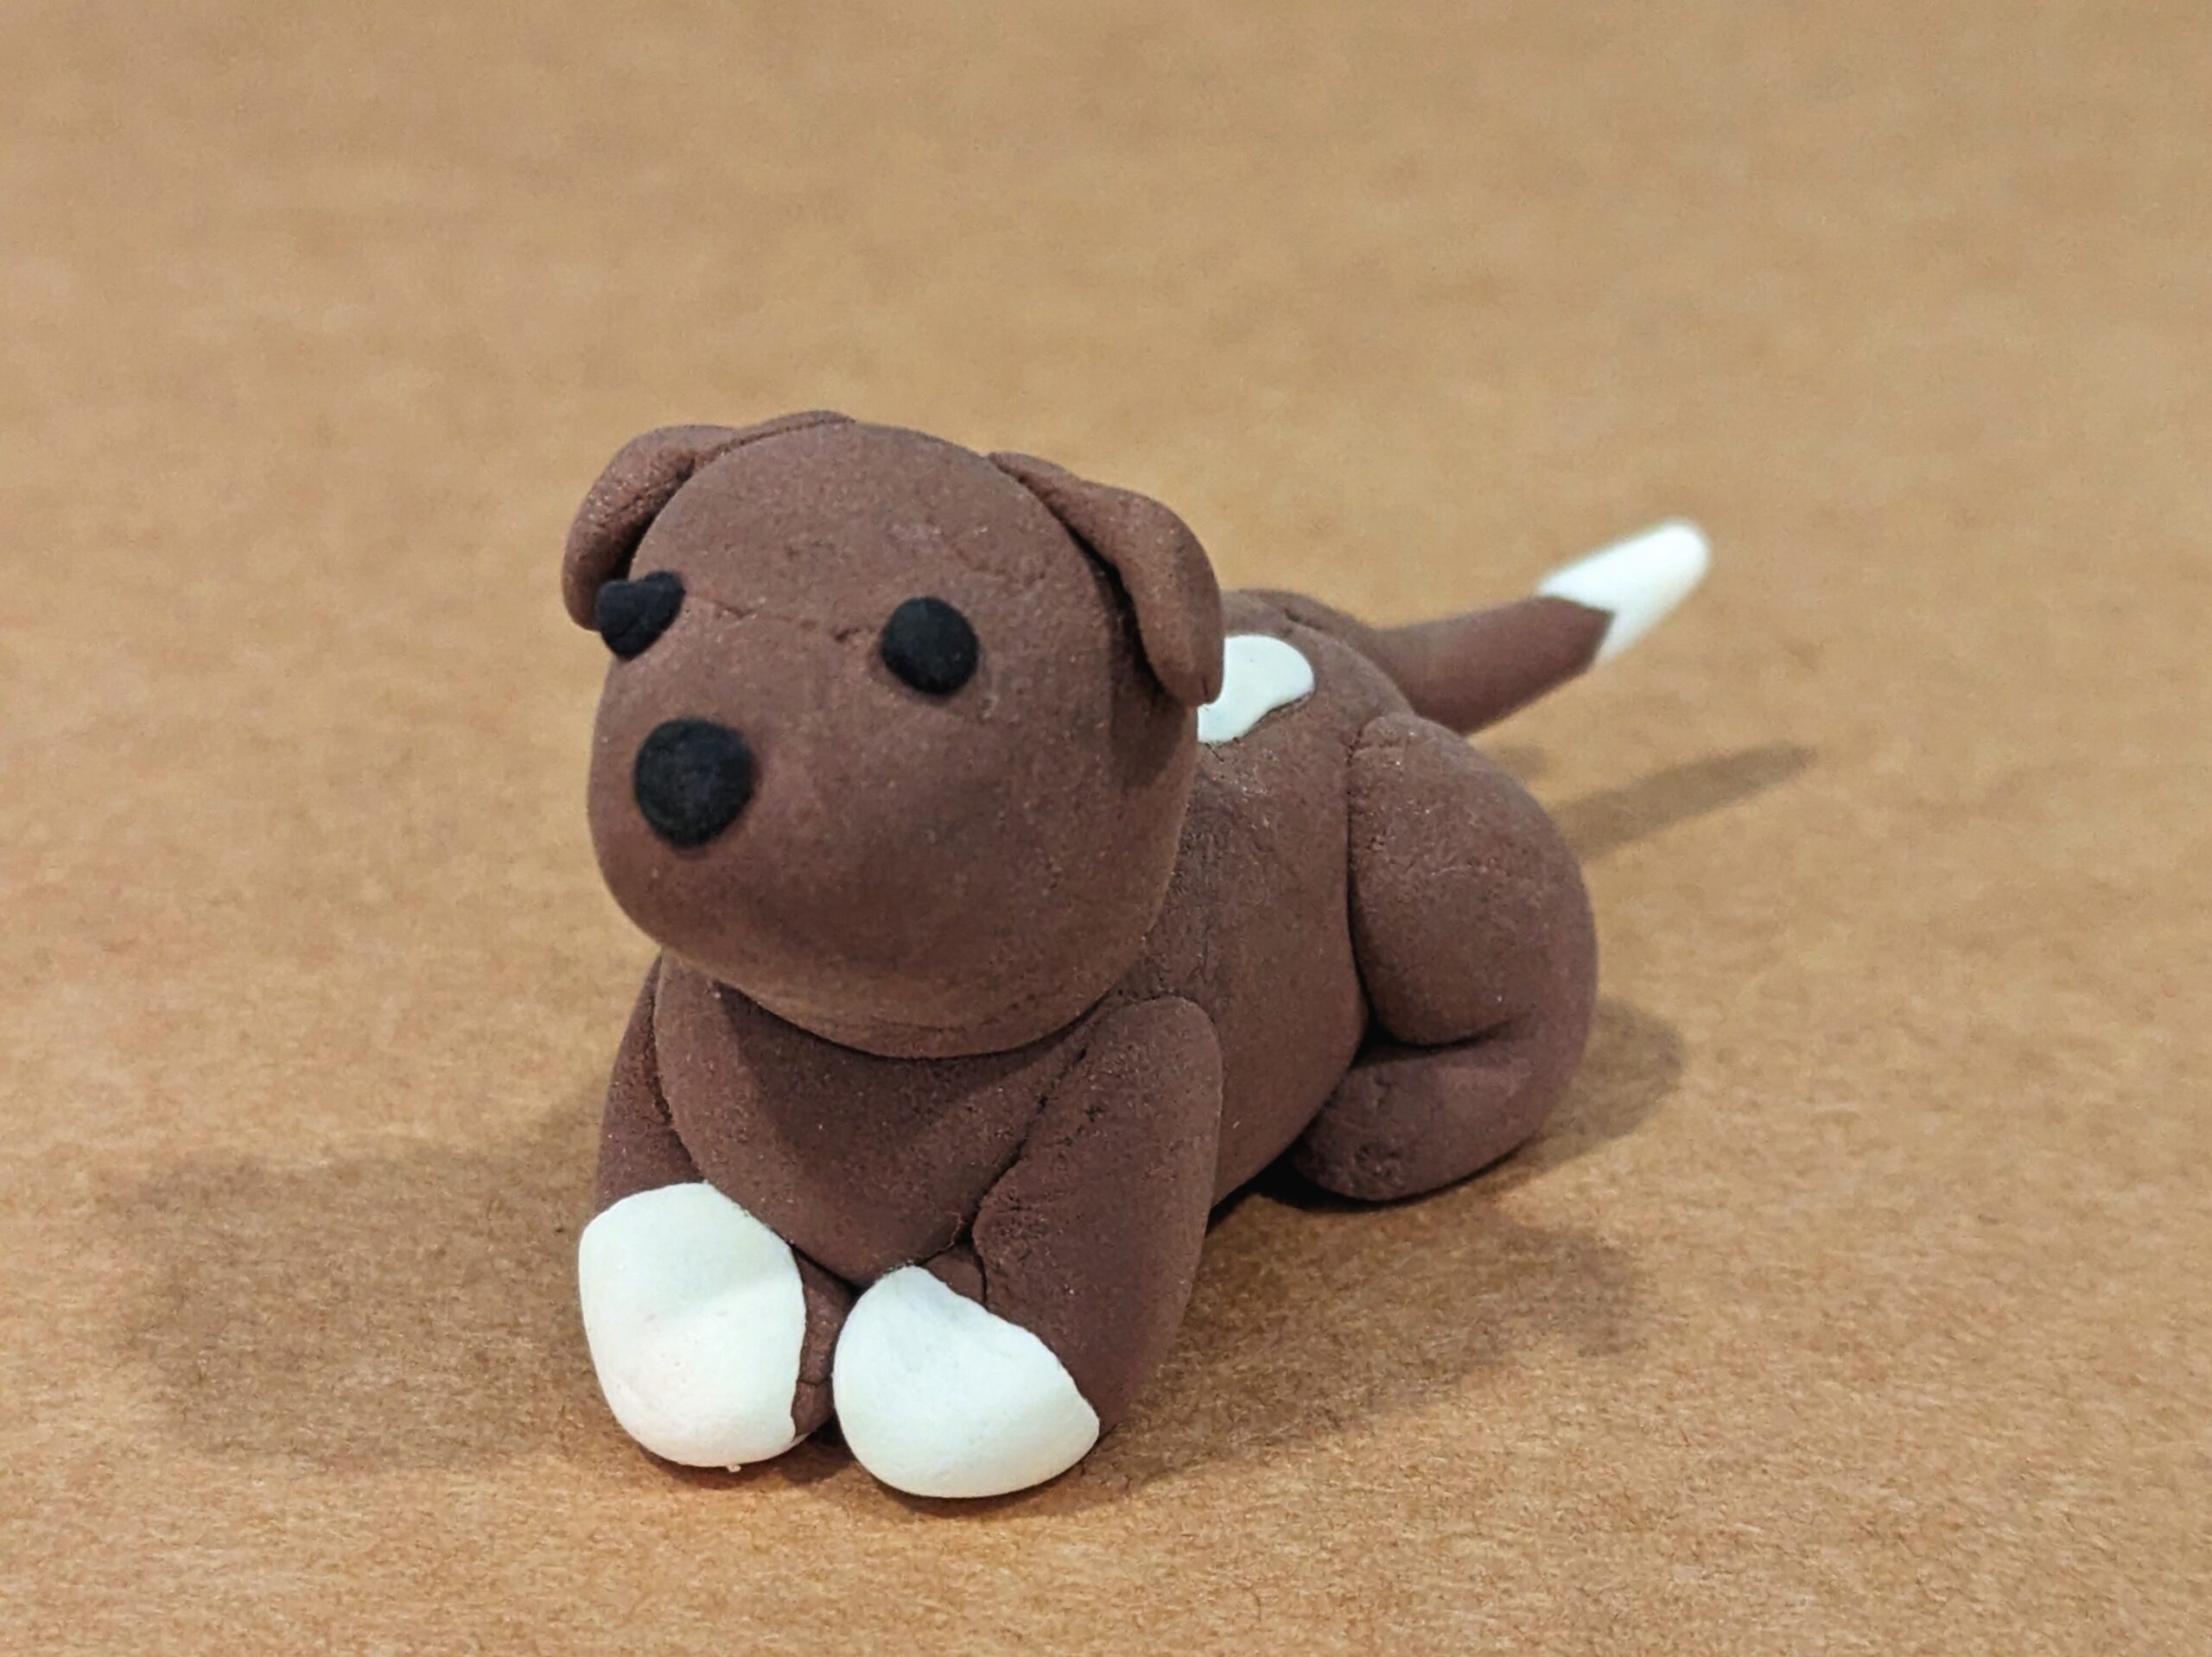 Brown and white dog sculpture made from Model Magic clay.